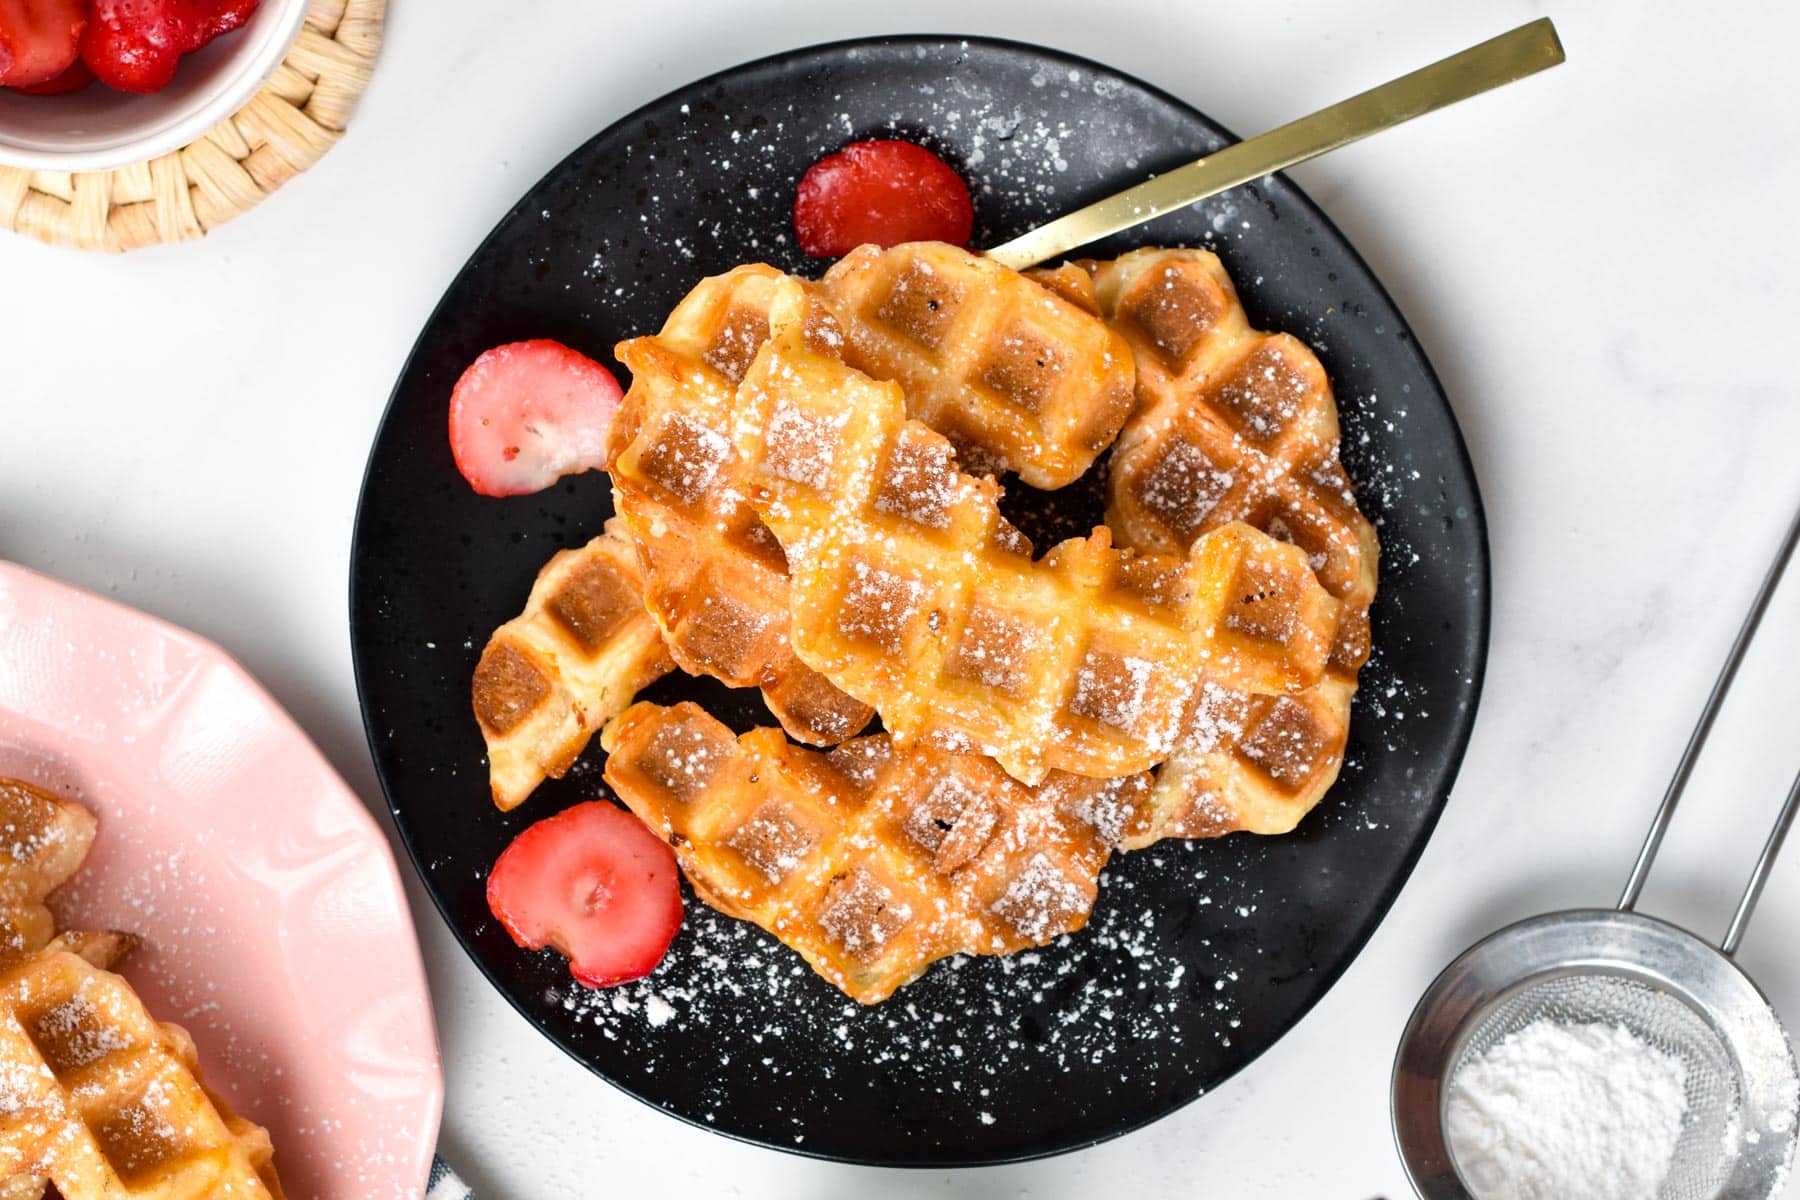 How to Make Waffles Crispy—And Keep Them That Way